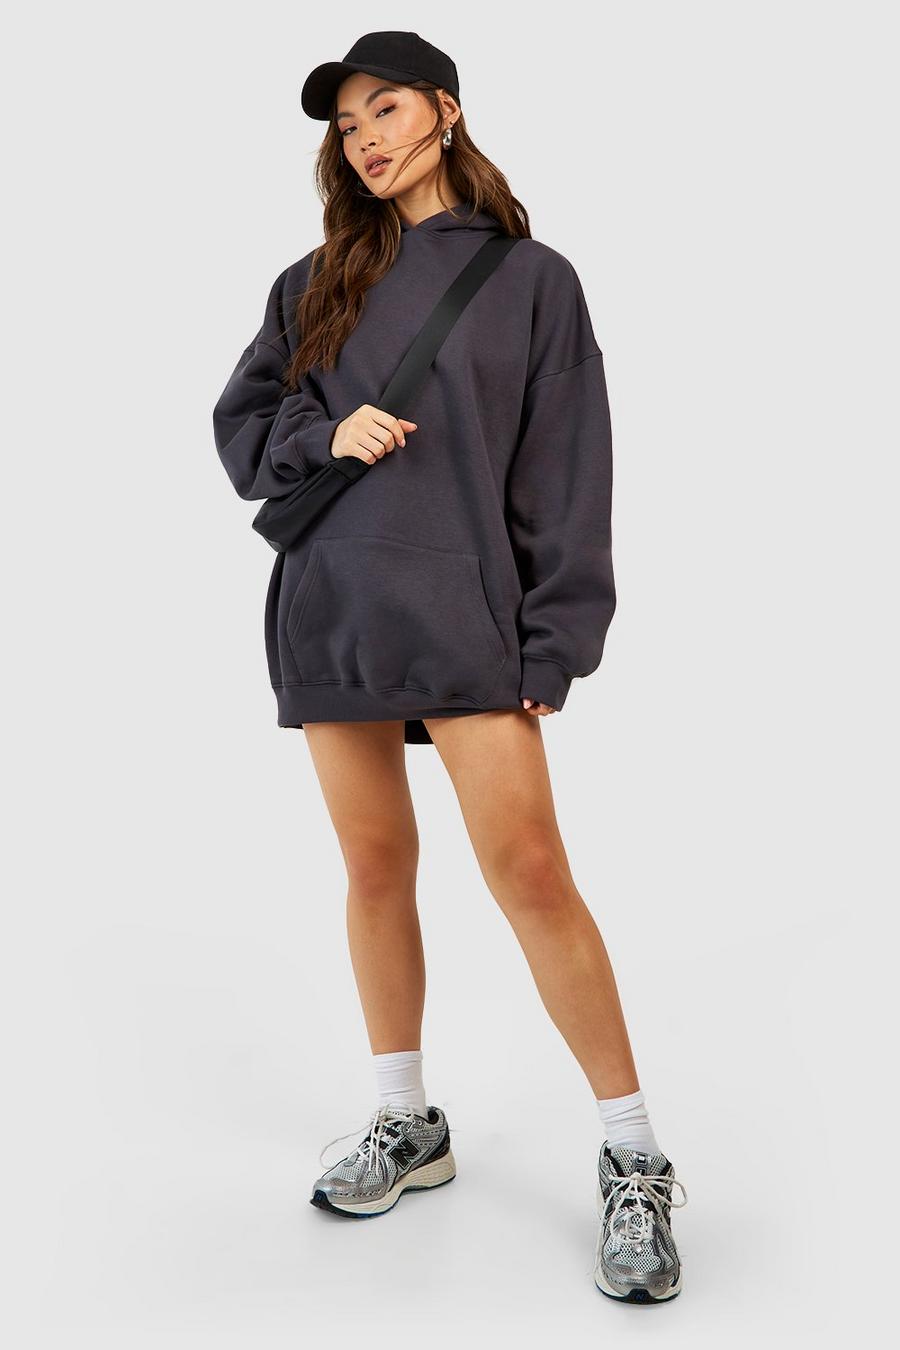 Charcoal grey Super Oversized Hooded Sweat Dress image number 1